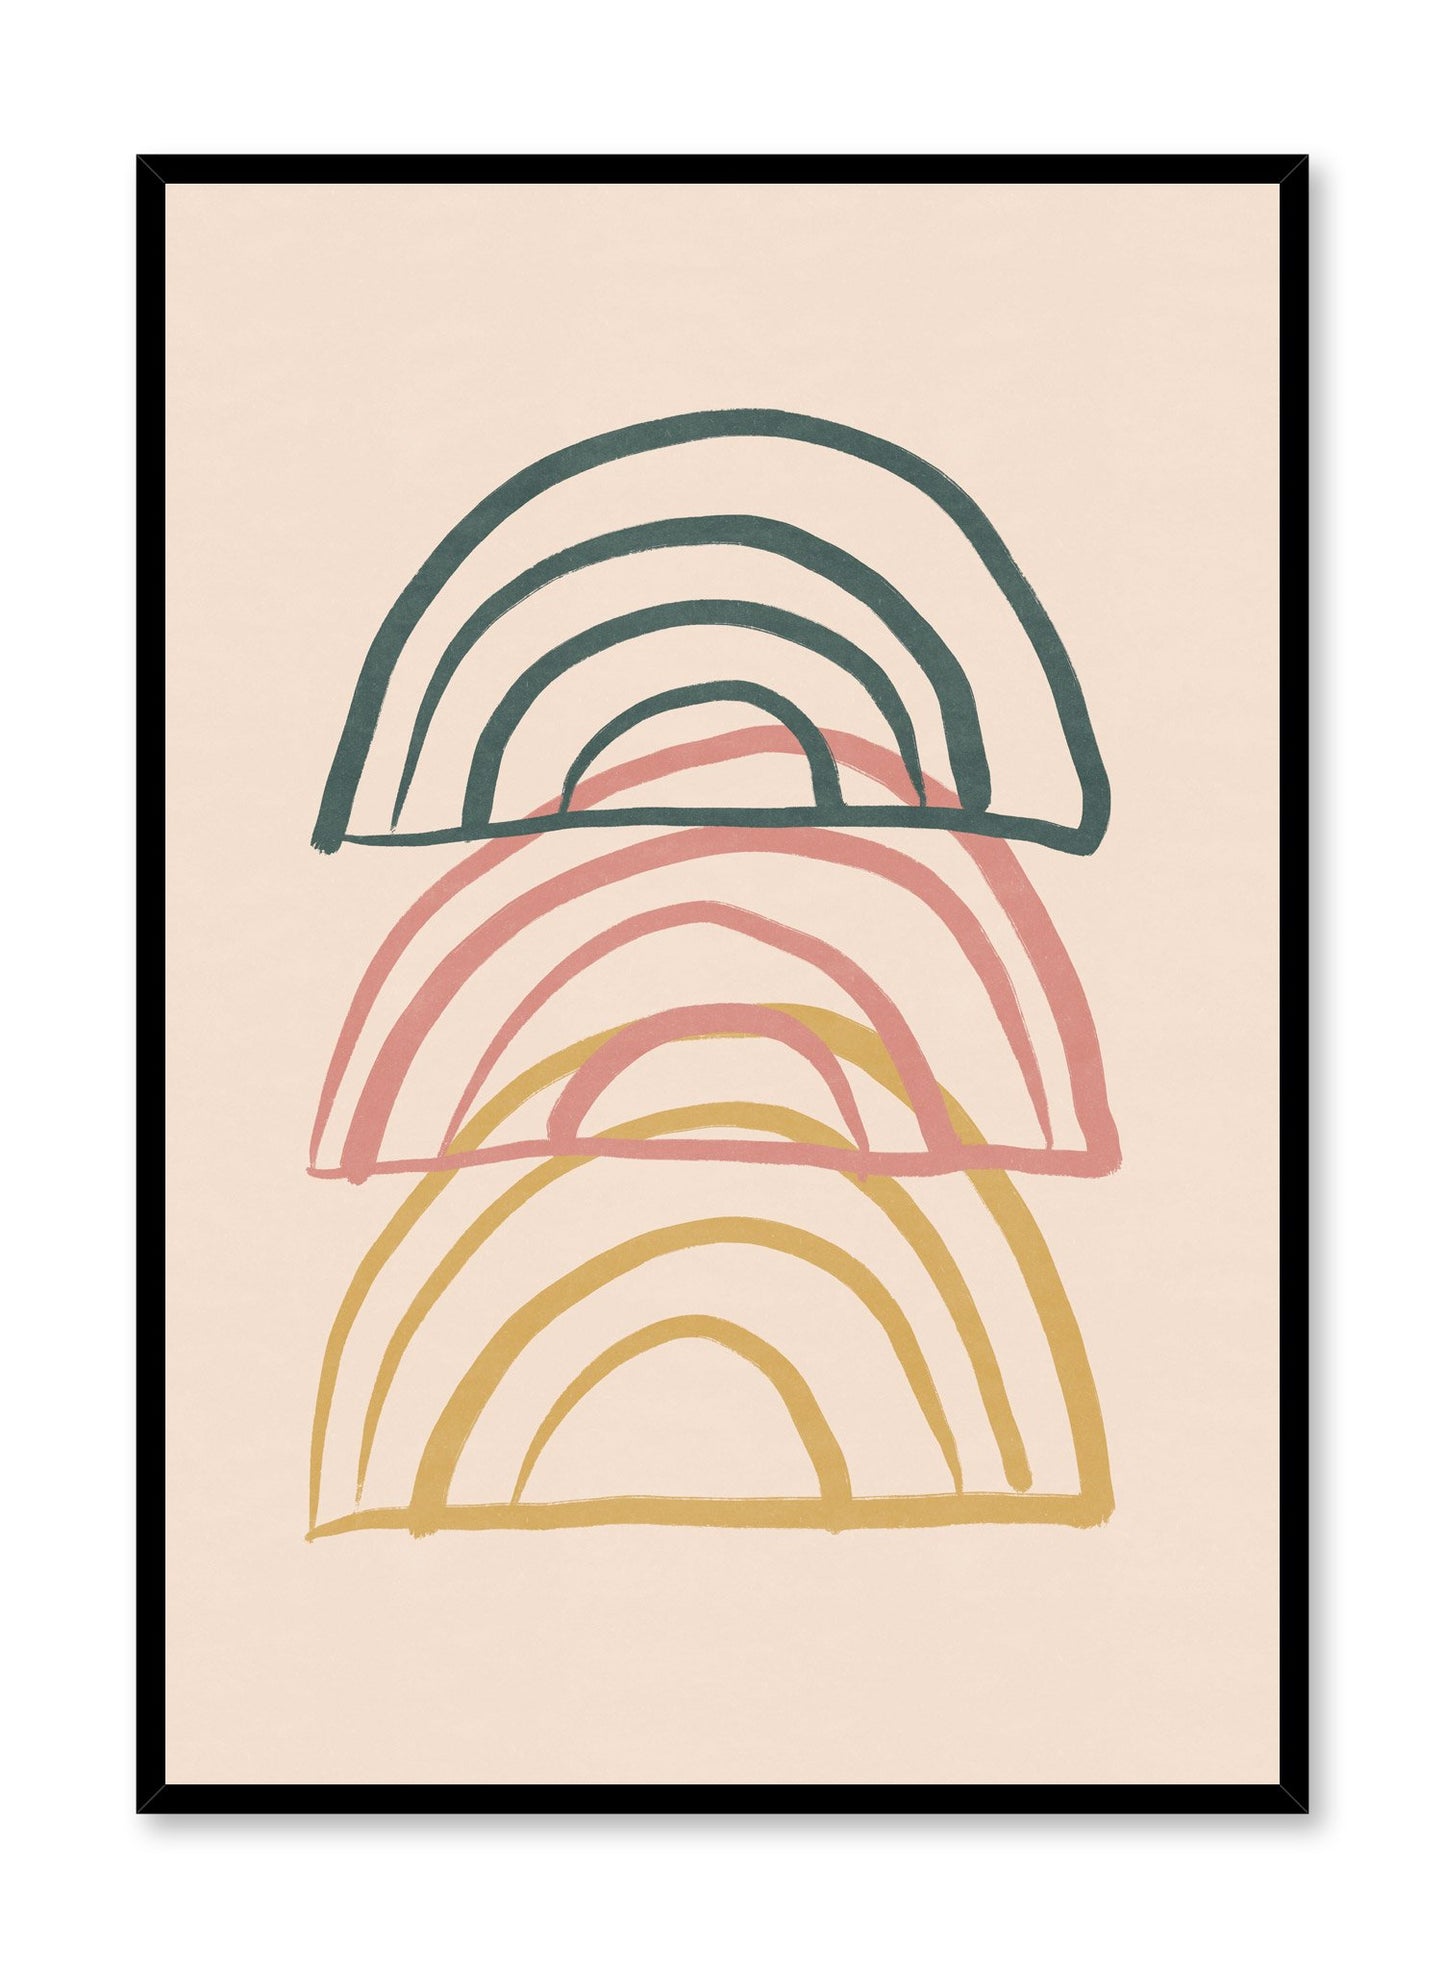 Modern minimalist poster by Opposite Wall with abstract design of Deconstructed Rainbow by Toffie Affichiste